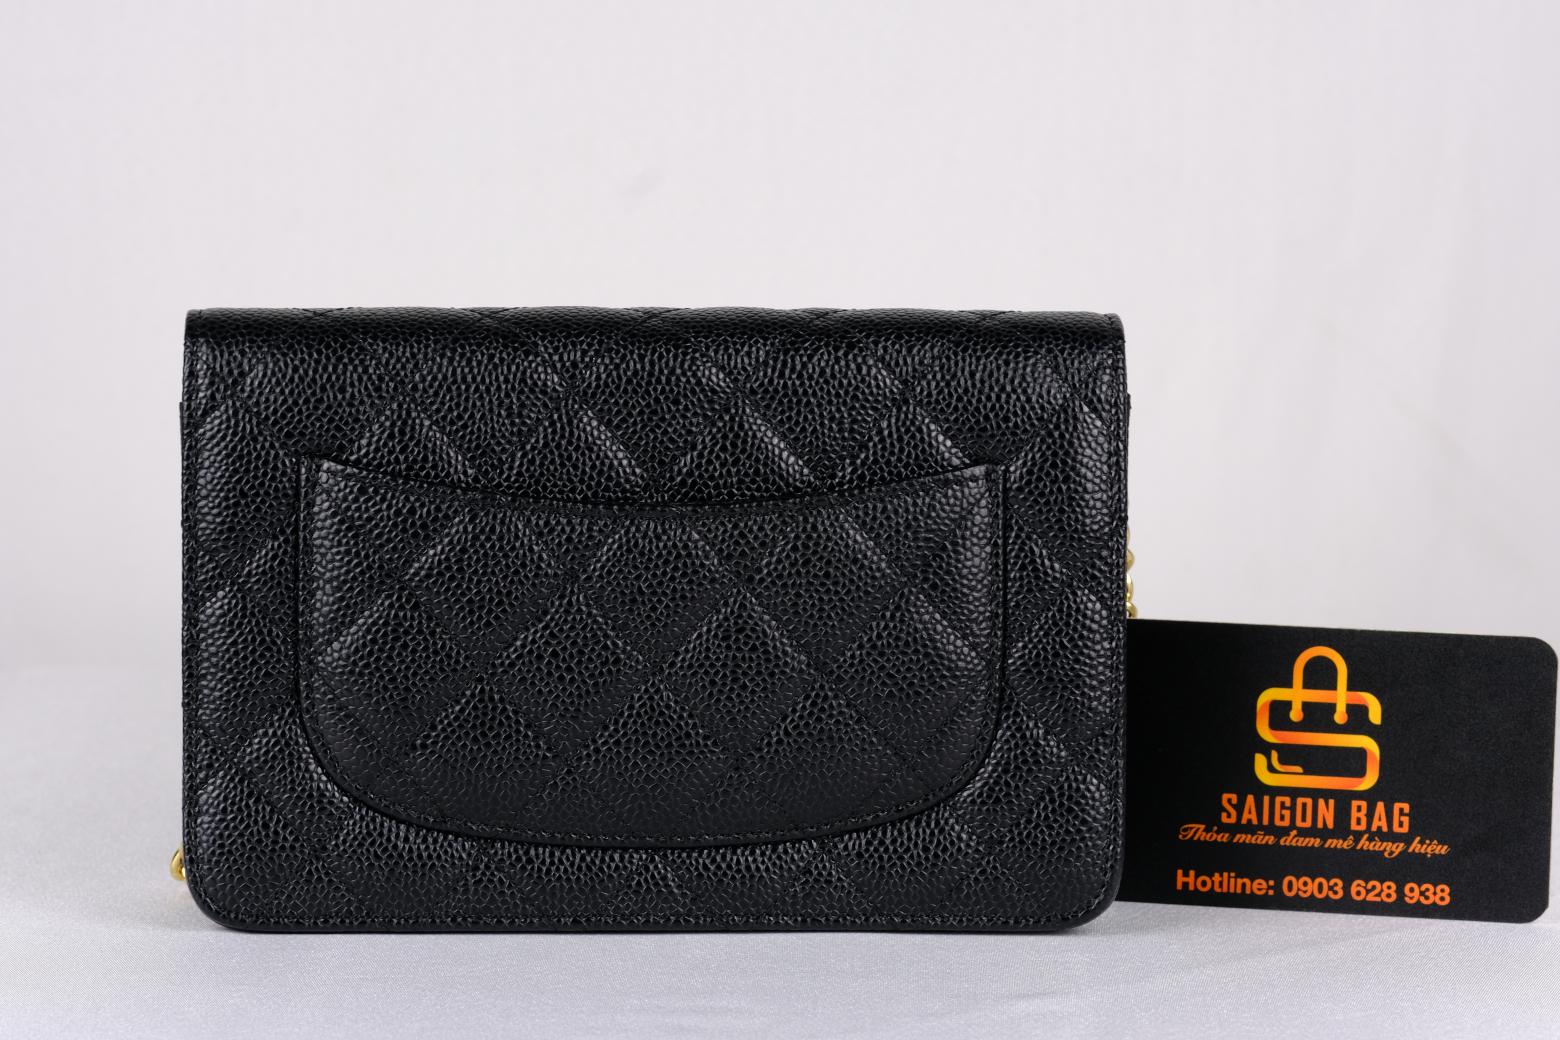 Chanel Classic Wallet On Chain – Đen Hạt